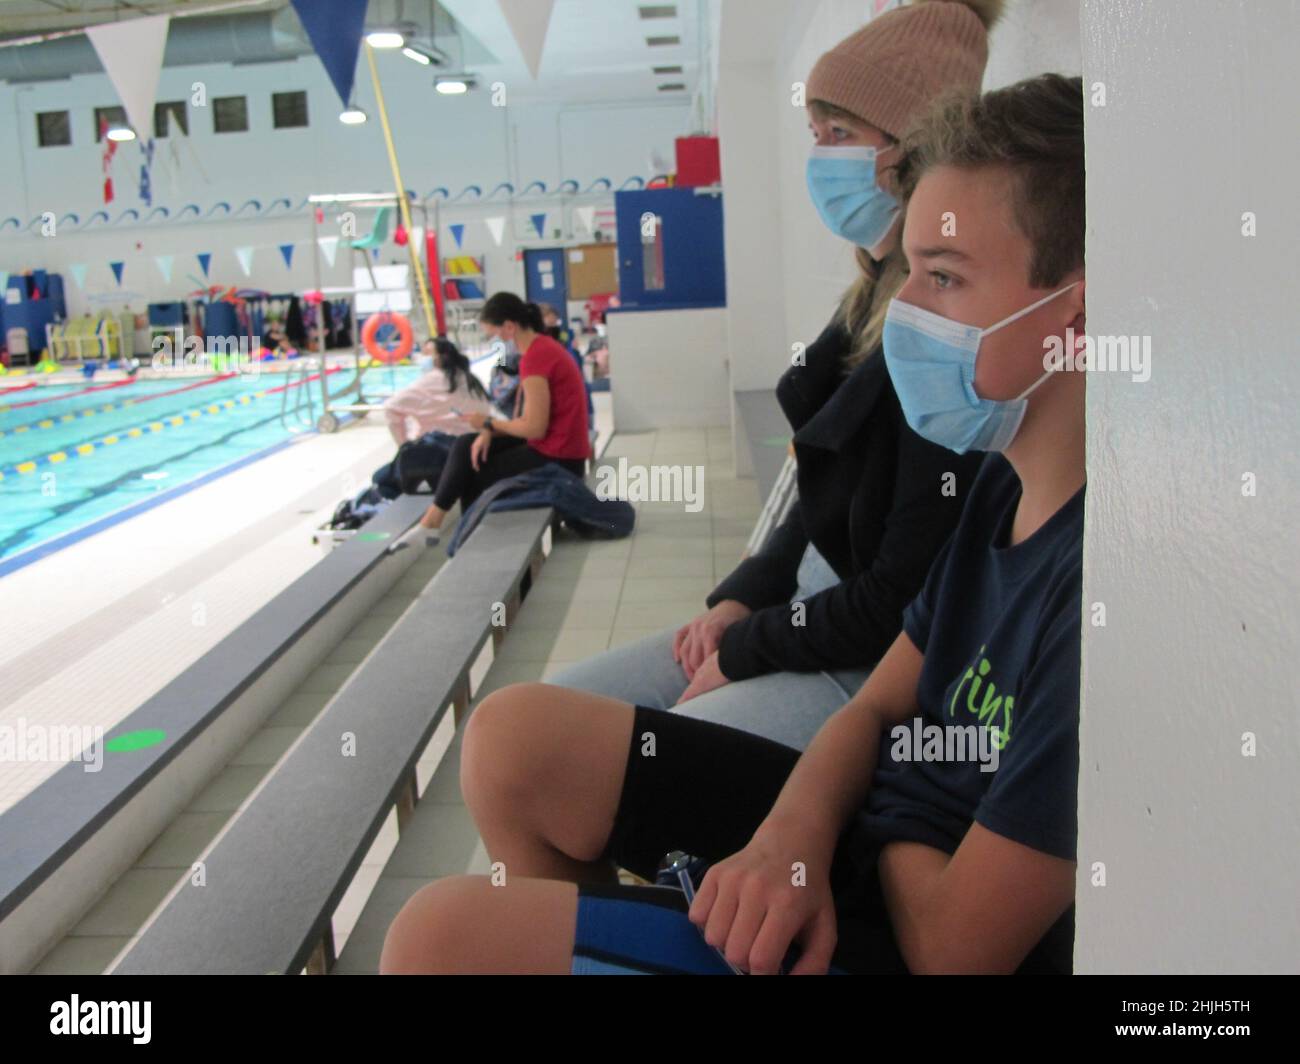 Woman and boy watching swimmers while wearing masks during Covid Stock Photo